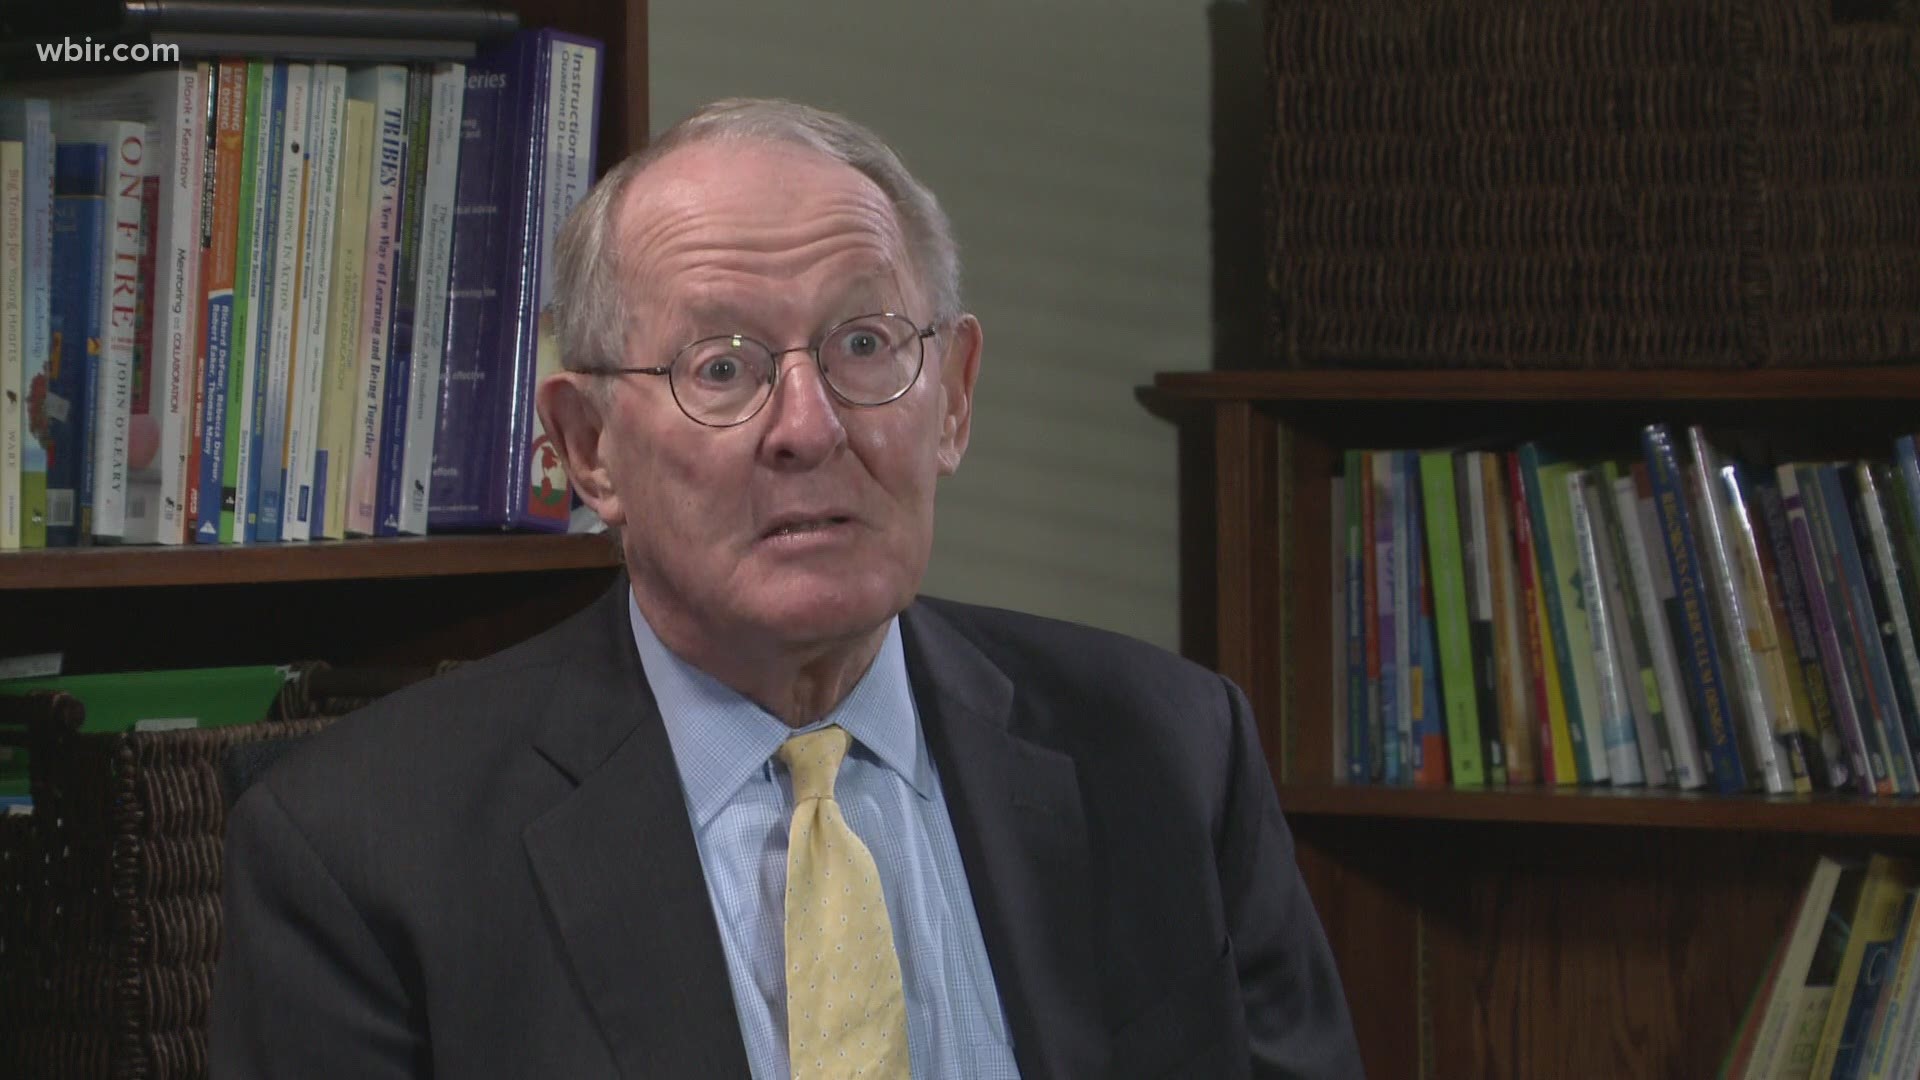 TN Sen. Lamar Alexander on Monday addressed the question of who won the Nov. 3 election.